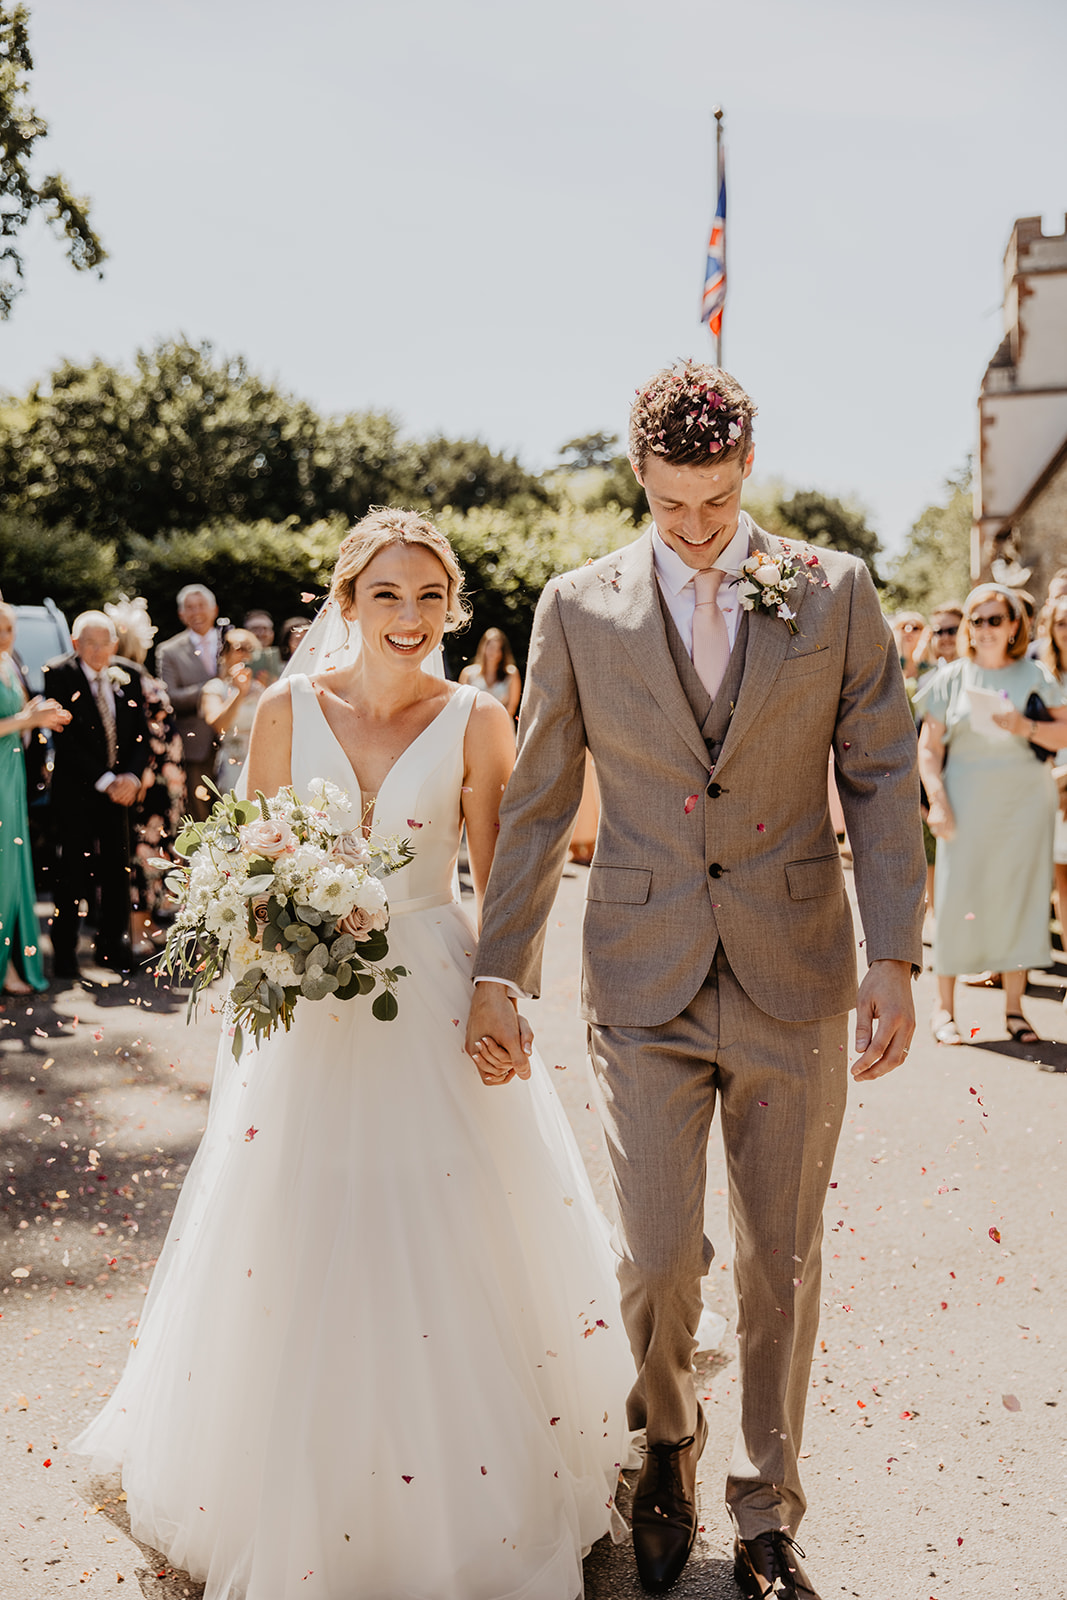 Bride and Groom under confetti at an RHS Gardens Wisley Wedding. By Olive Joy Photography